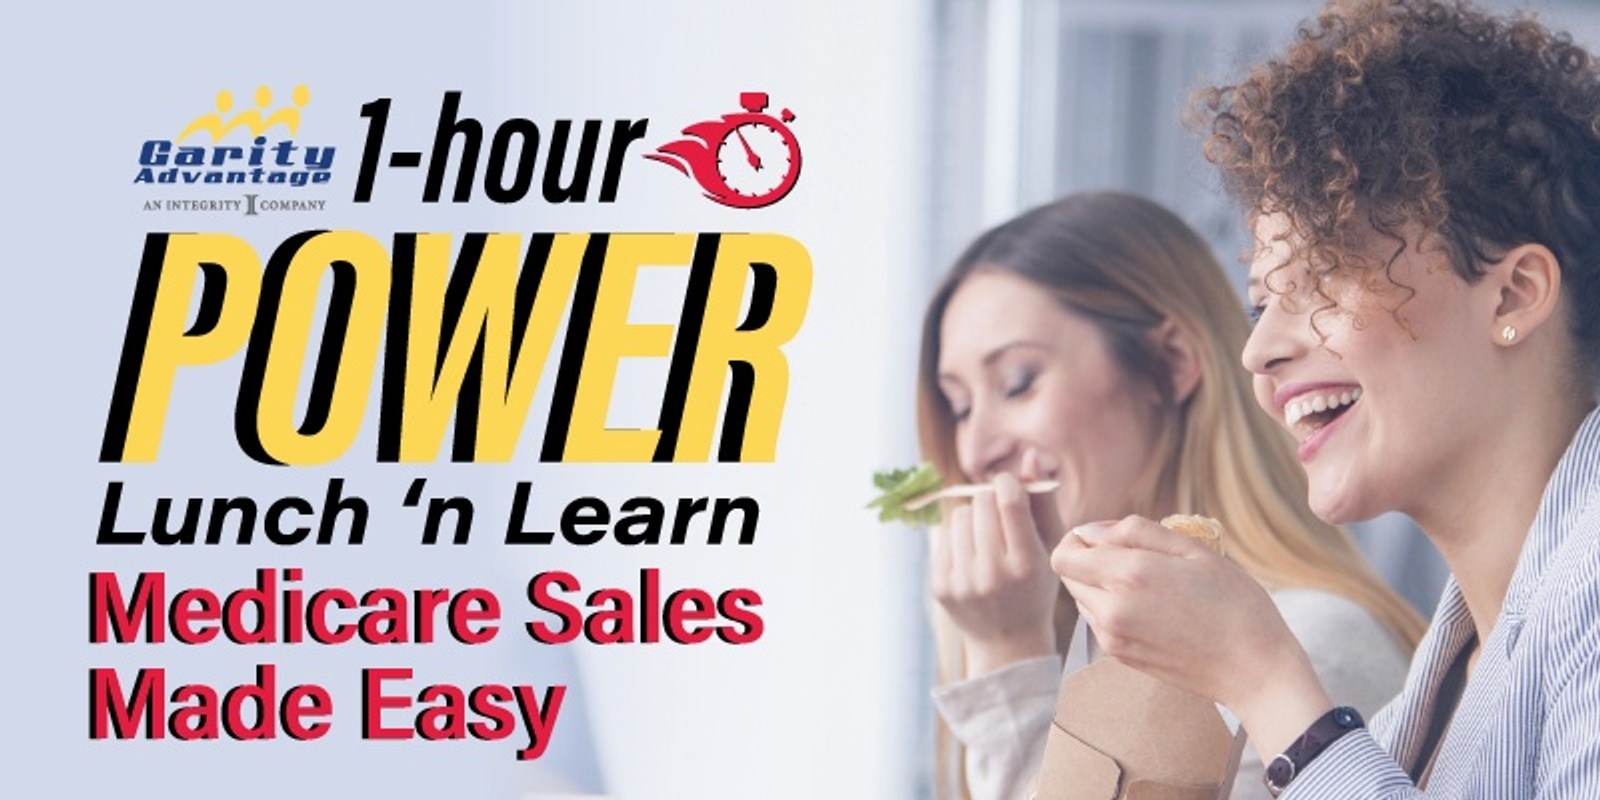 Banner image for One-Hour Power Lunch ‘n Learn - Medicare Sales Made Easy